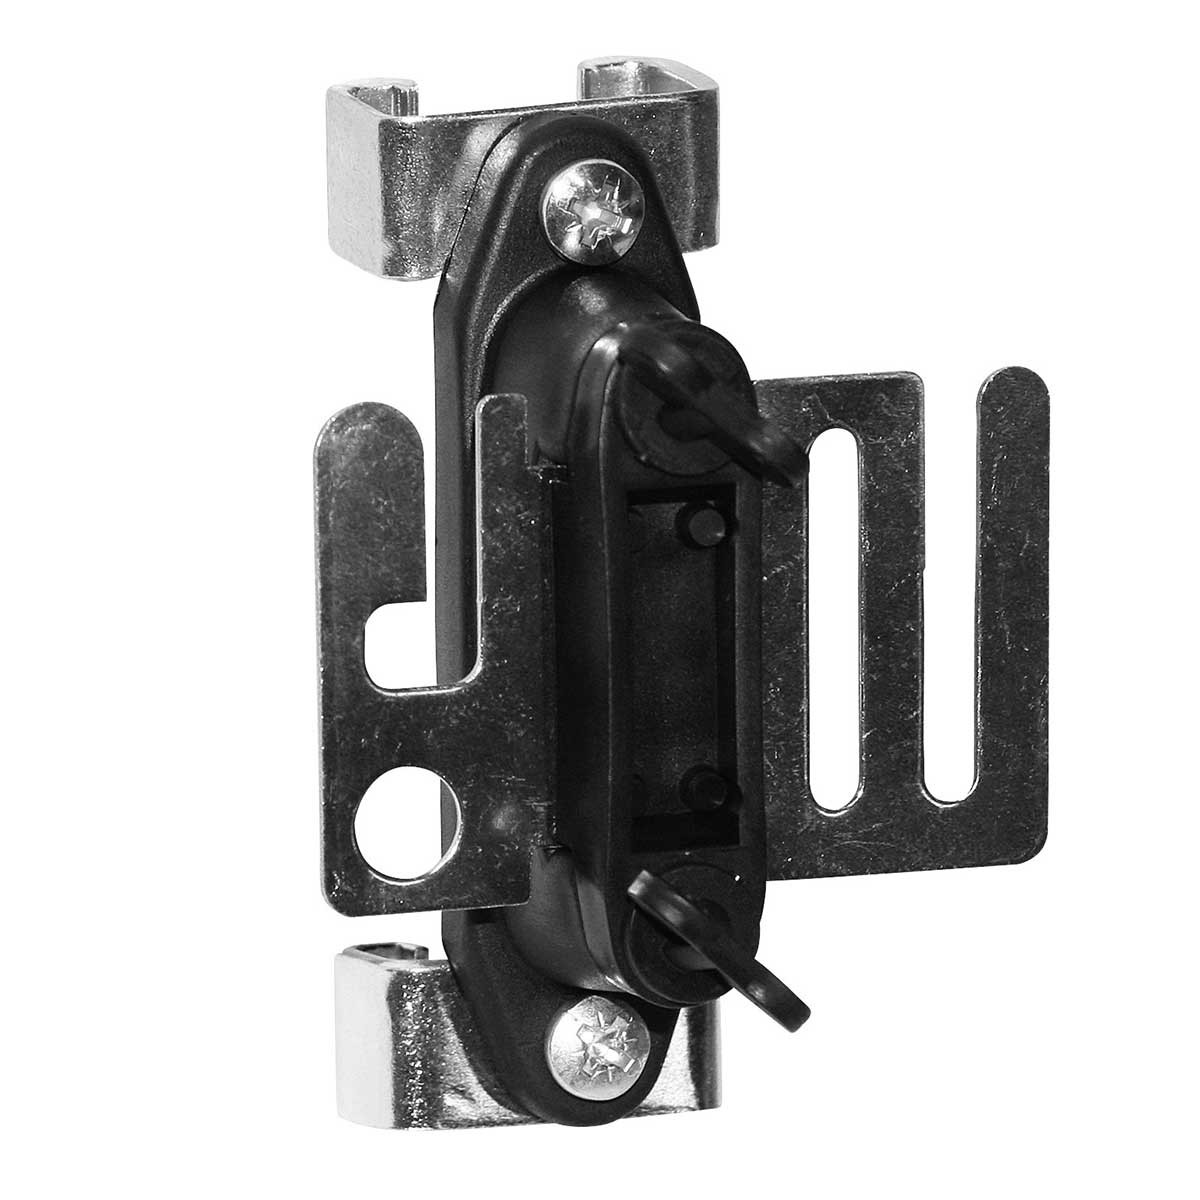 2x Agrarzone T-post, T-post strap gate handle insulators + stainless steel connection plates